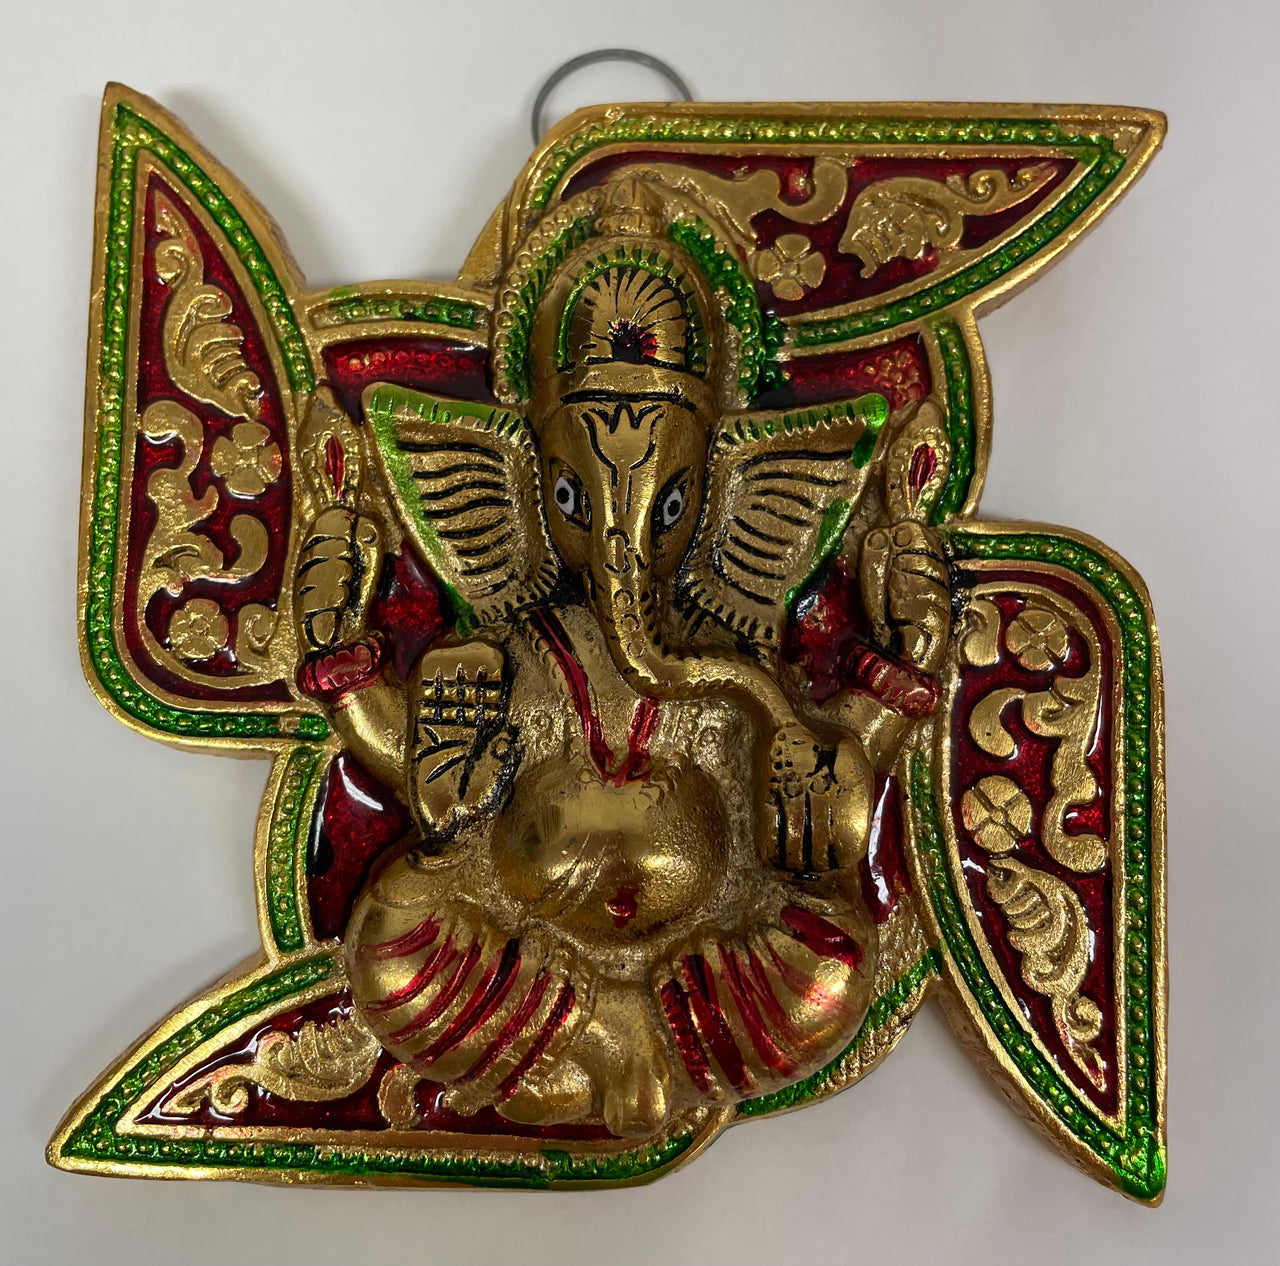 Metal Lord Ganesha on Swastik for Door Hanging with Colorful Meenakari Work Article Wall Hanging - 5 inches